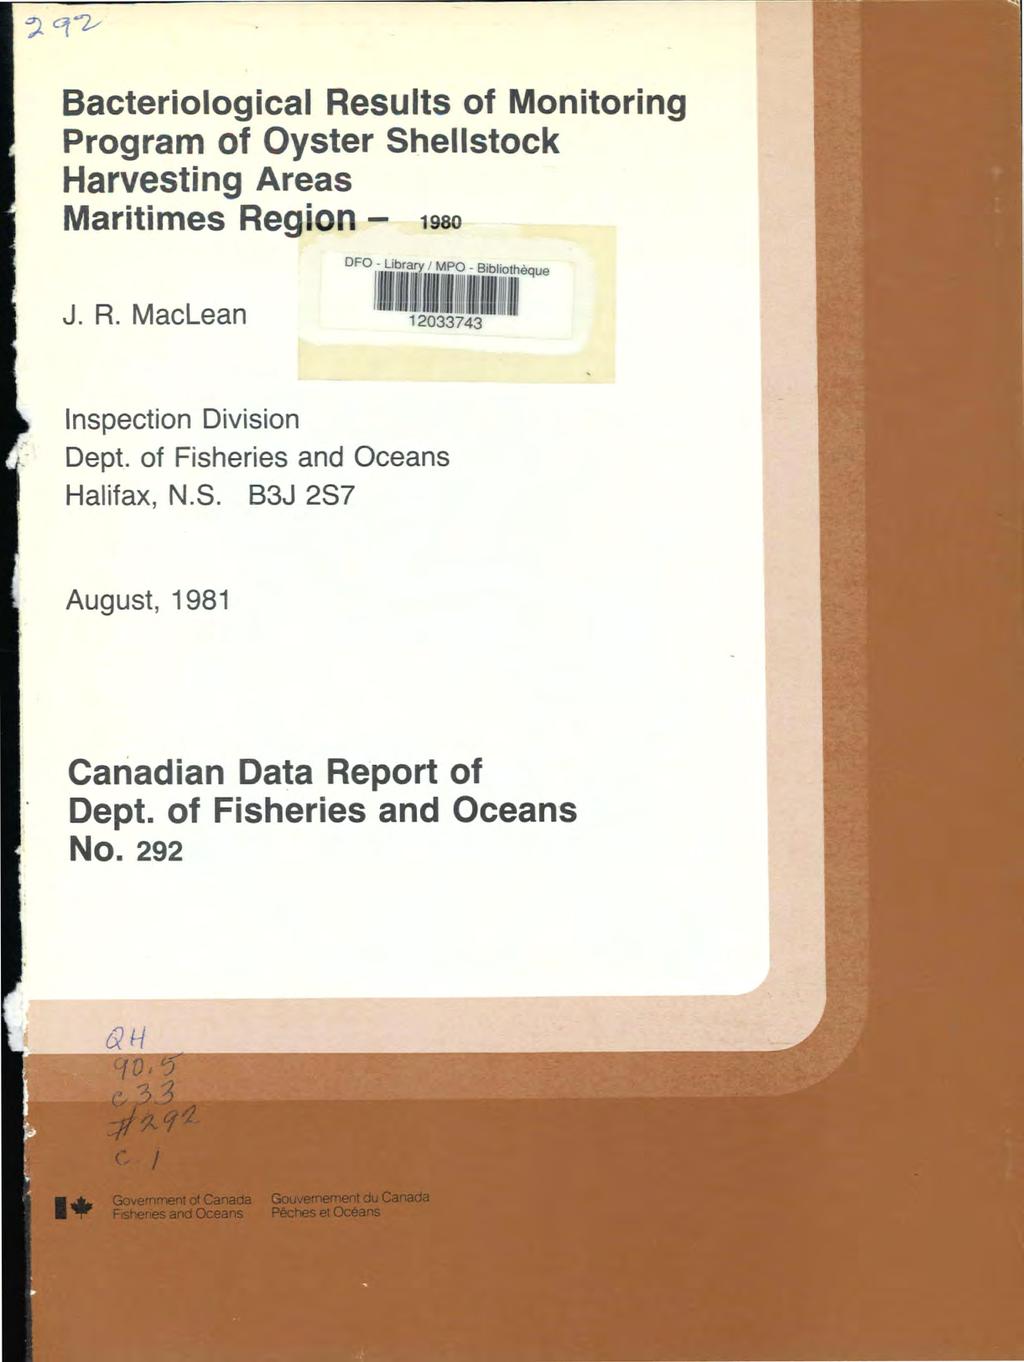 Bacteriological Results of Monitoring Program of Oyster Shellstock Harvesting Areas Maritimes Region 1980 J. R. MacLean DFO L bra y / MPO Bibliothèque 1111141,31fl ThIhIIIII II h Inspection Division Dept.